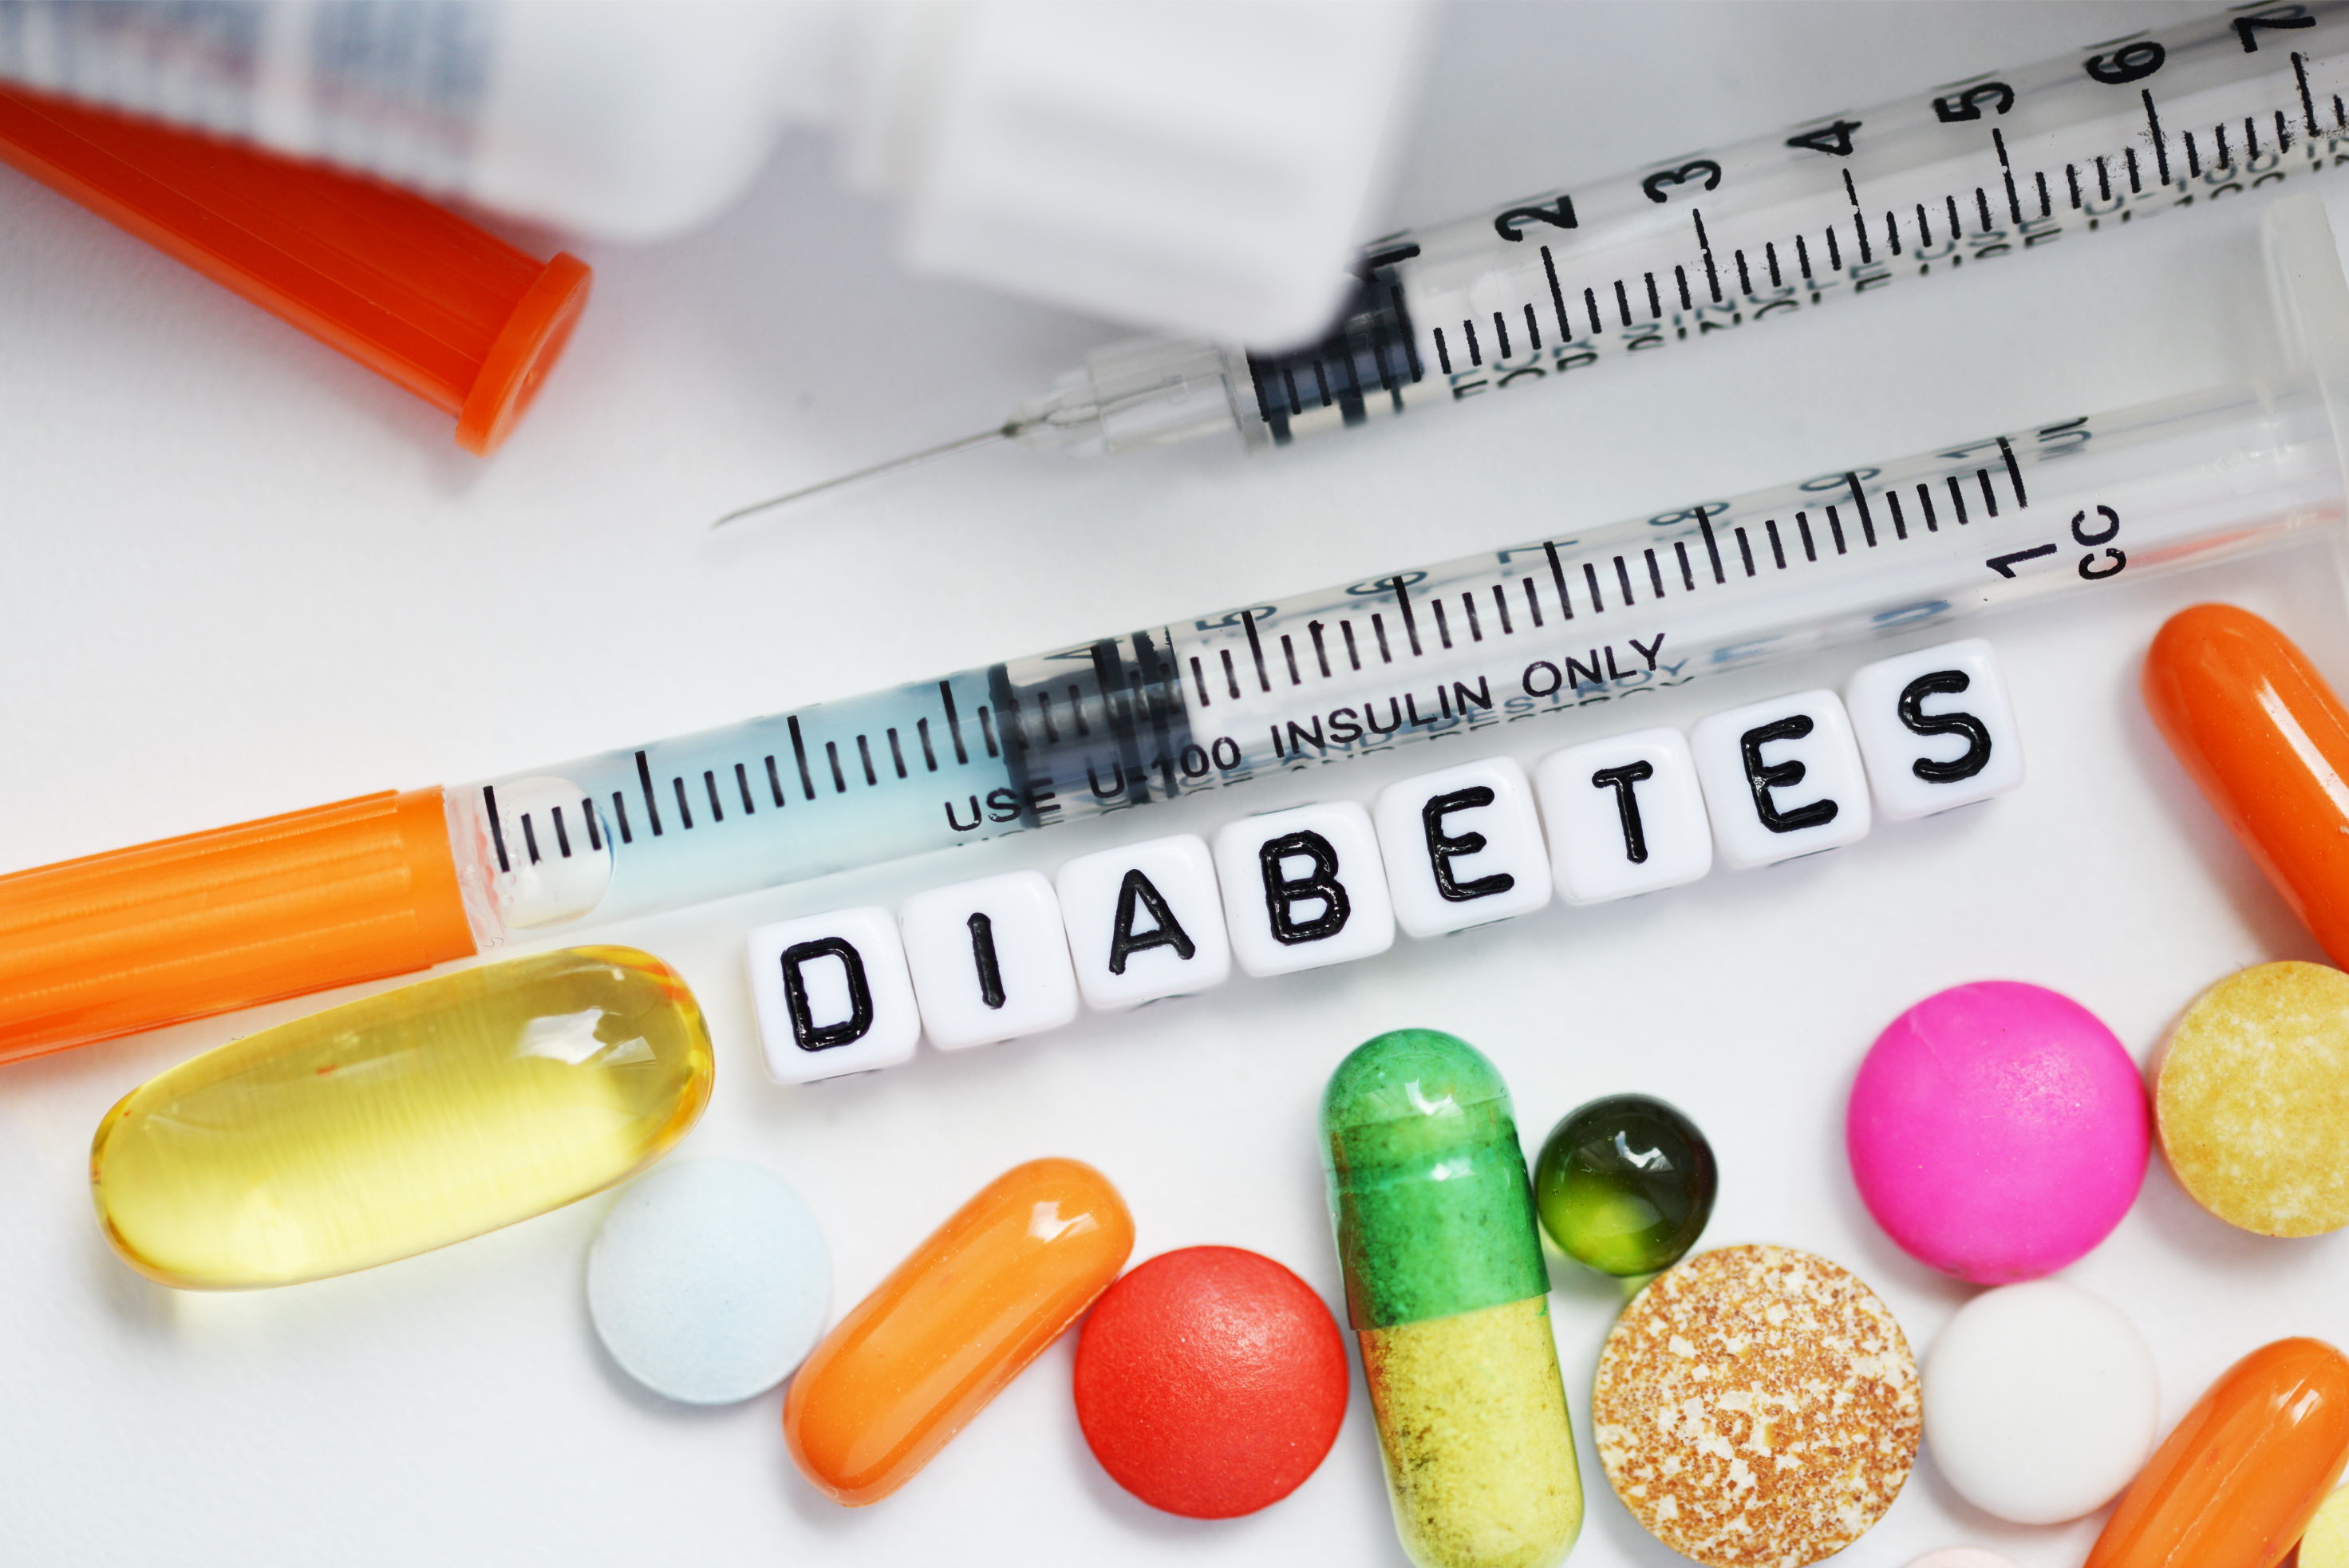 Diabetic? Here is Why You Simply Must Supplement with Collagen